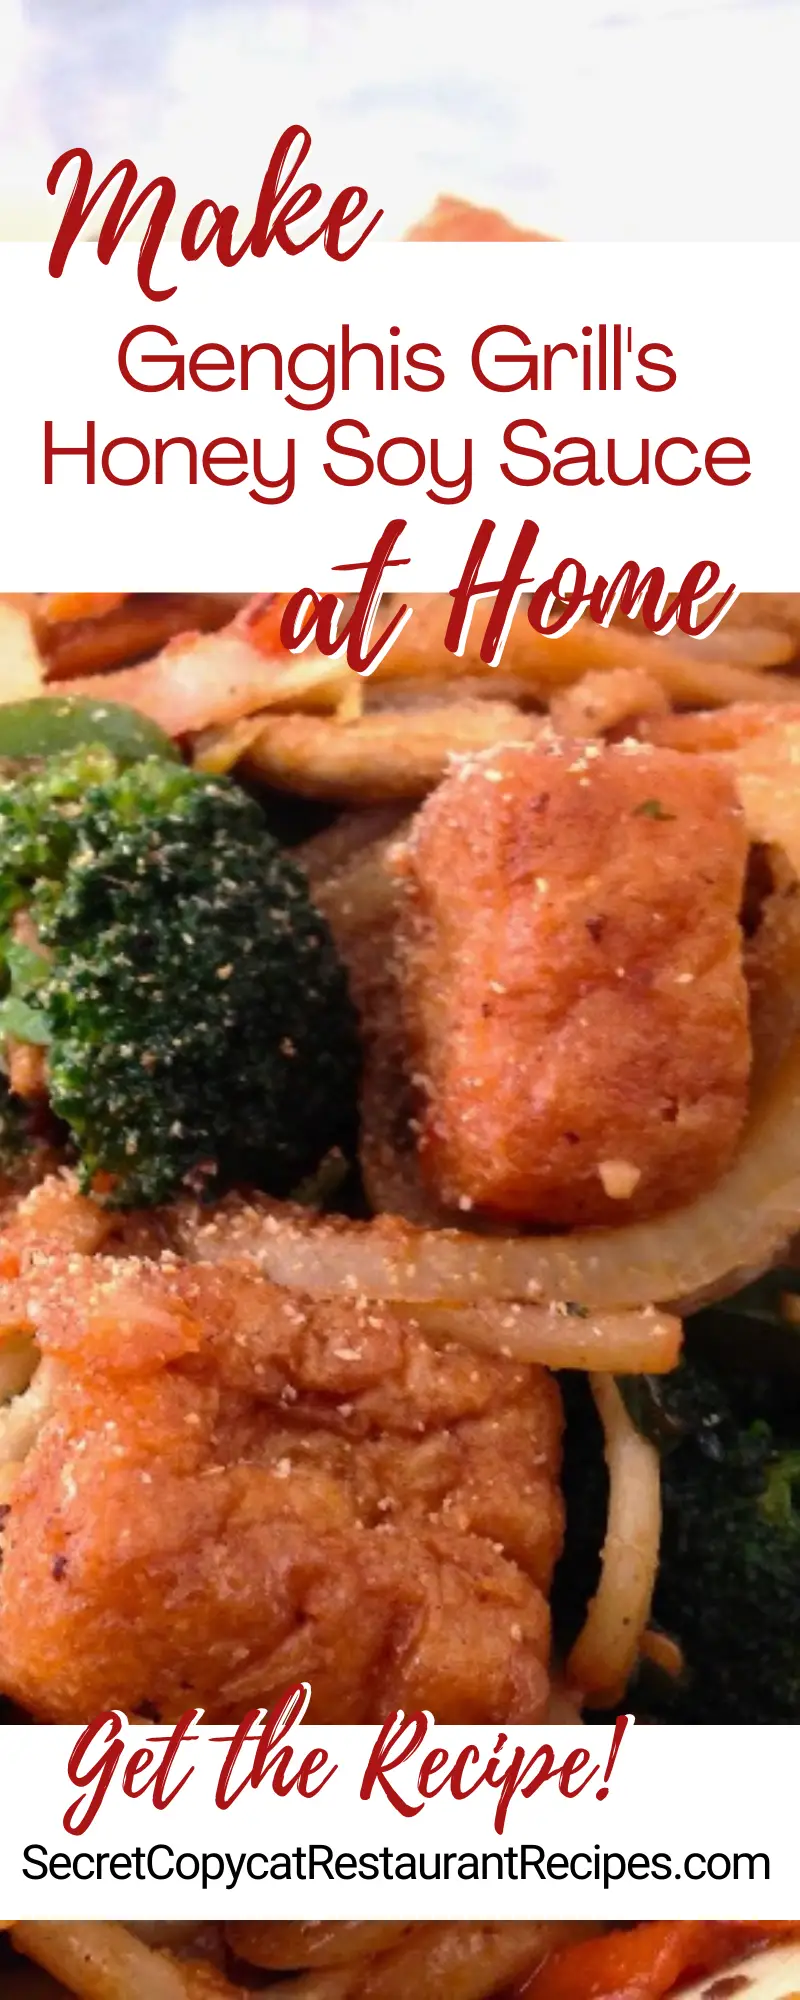 Genghis Grill Honey Soy Sauce Recipe